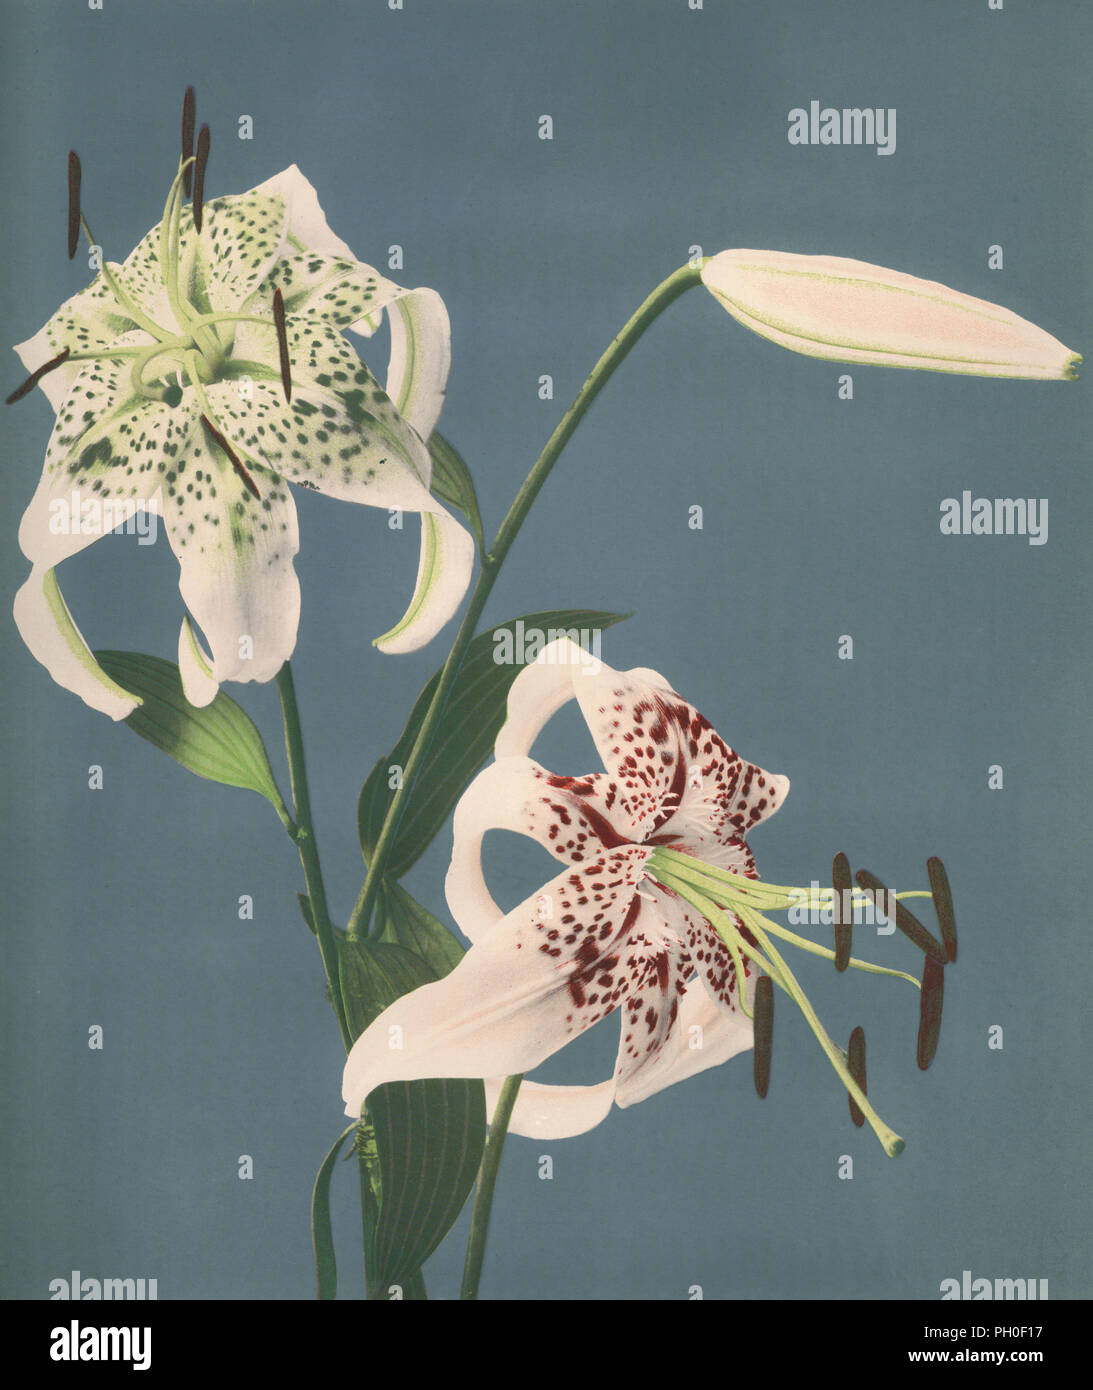 [ 1890s Japan - Lily Flowers ] —   Lily (Kanoko-yuri, lat. Lilium speciosum) by Kazumasa Ogawa.  It was published in 'Japan, Described and Illustrated by the Japanese,' edited by Captain Frank Brinkley and published in 1897 by the J. B. Millet Company.  19th century vintage collotype. Stock Photo